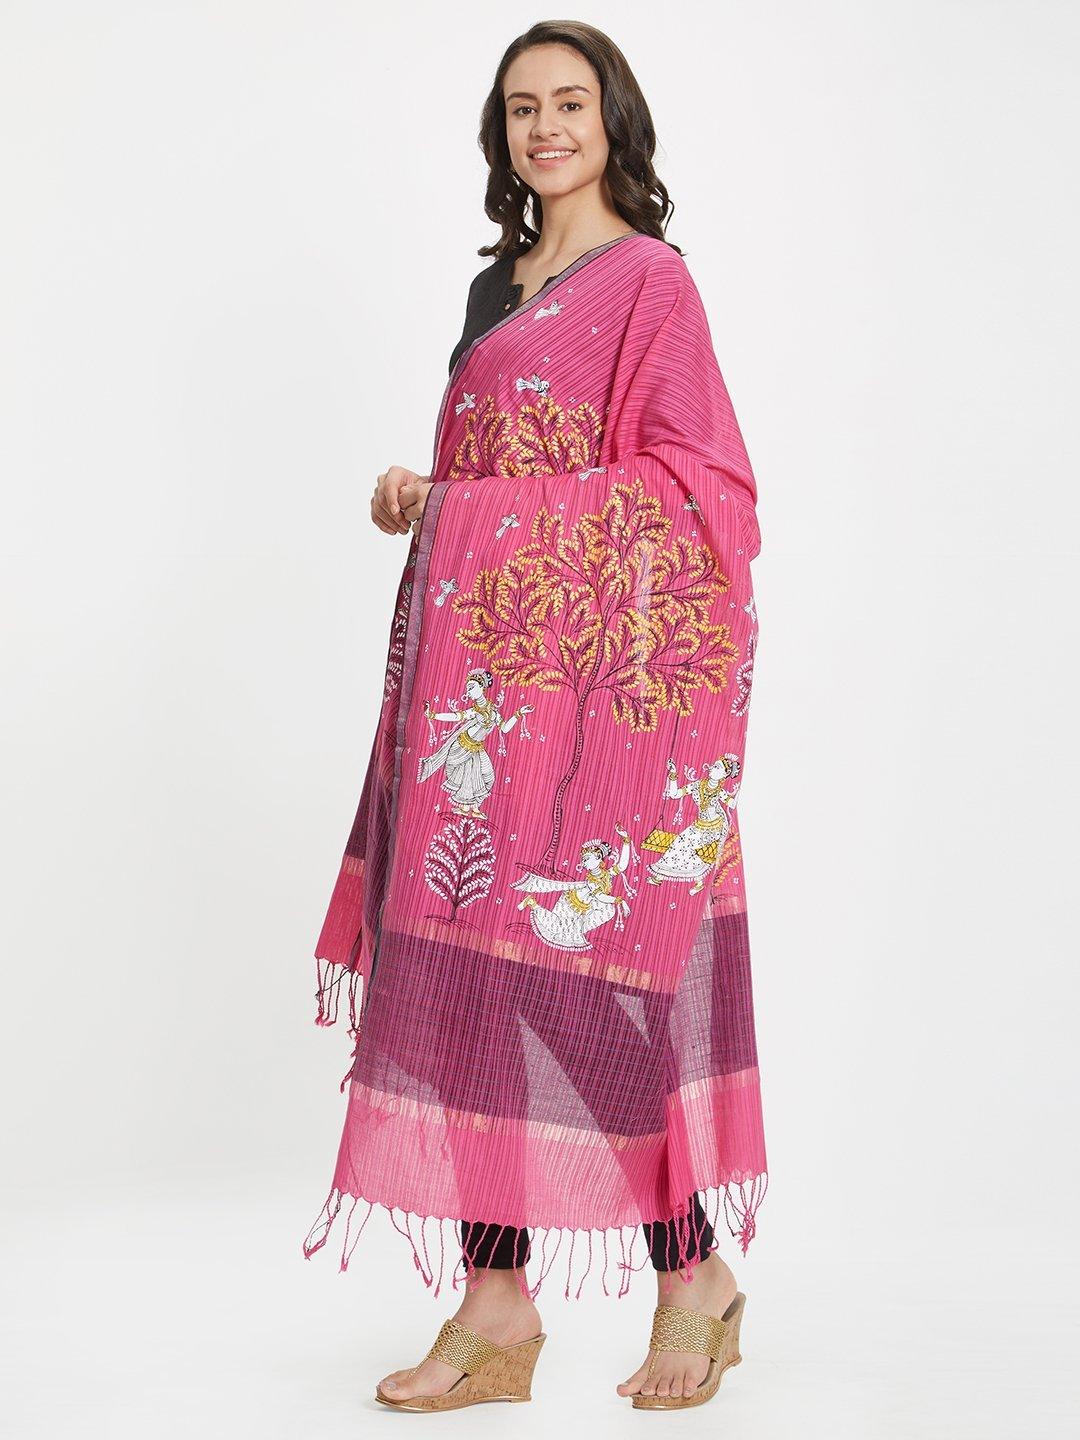 CraftsCollection.in - Pink Cotton Dupatta with handpainted Pattachitra motifs